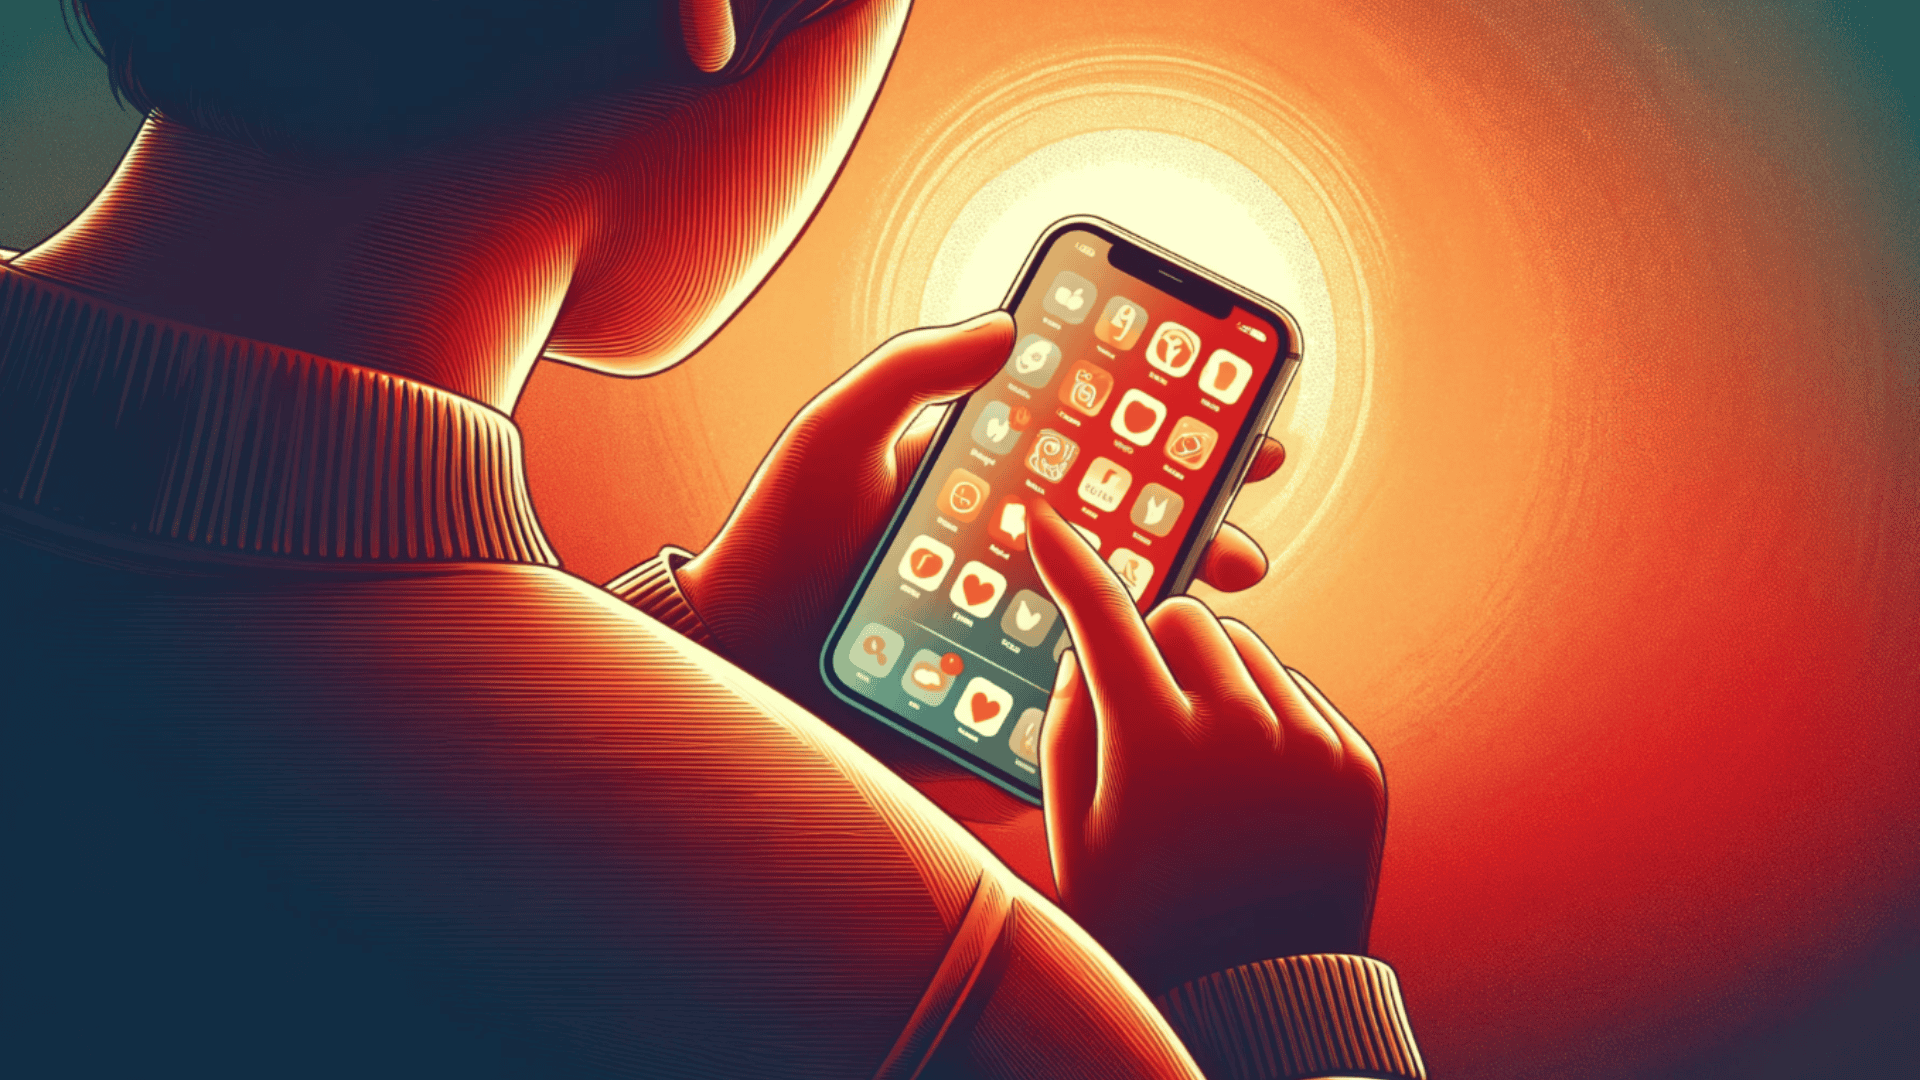 An illustration of someone using a smartphone with apps displayed on the screen. 